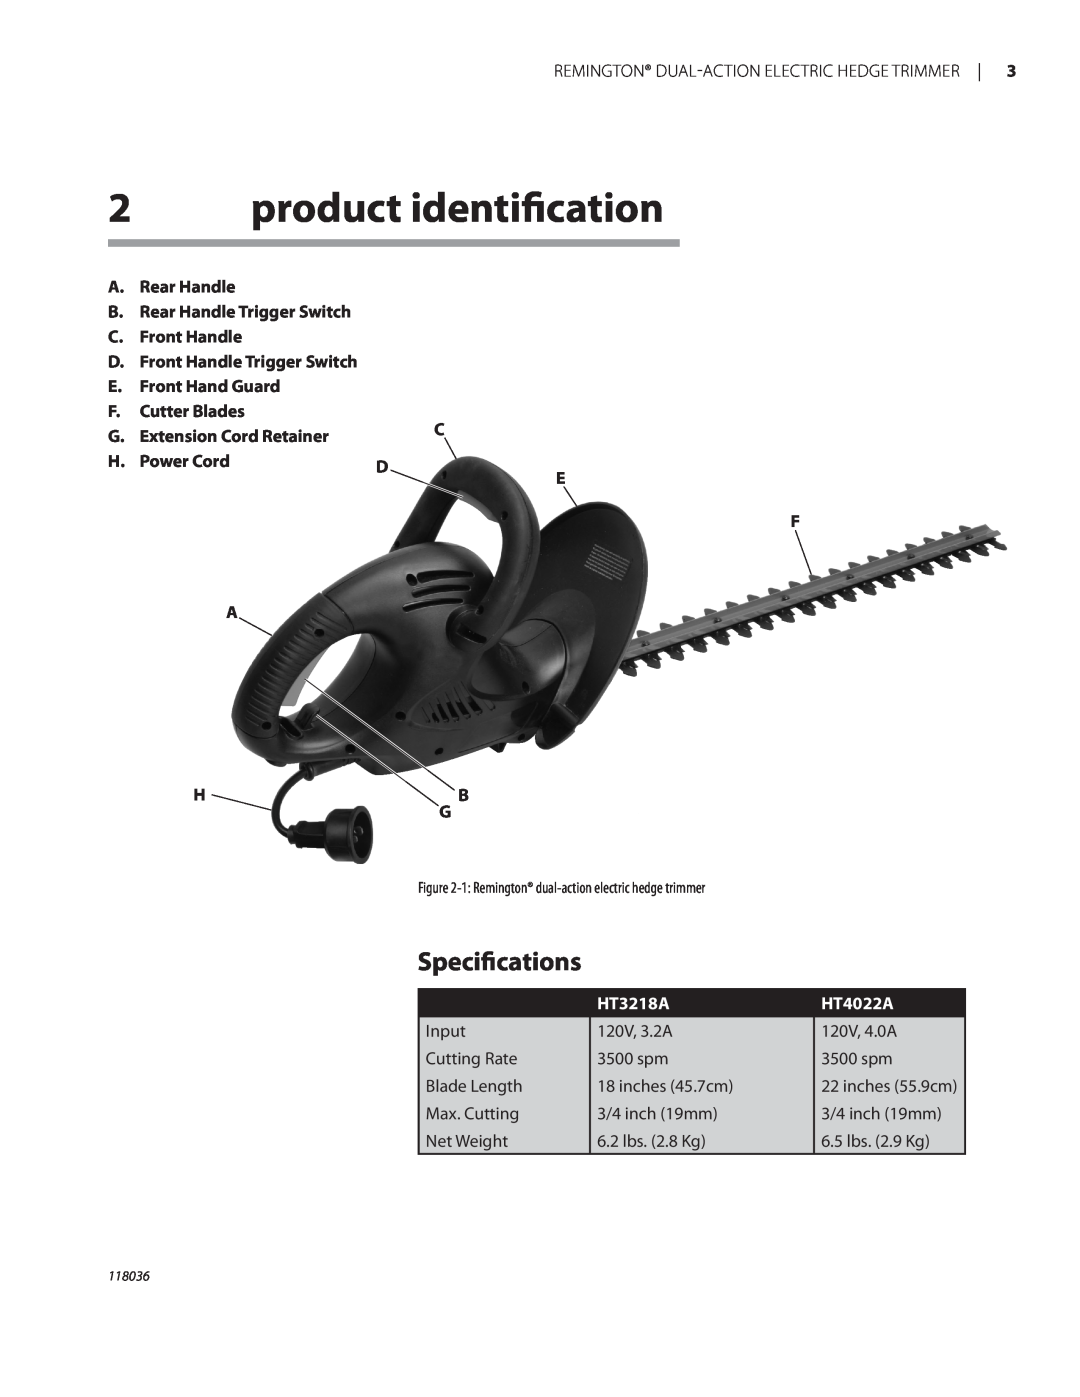 Remington Power Tools HT3218A, HT4022A product identiﬁcation, Speciﬁcations, A.Rear Handle B.Rear Handle Trigger Switch 